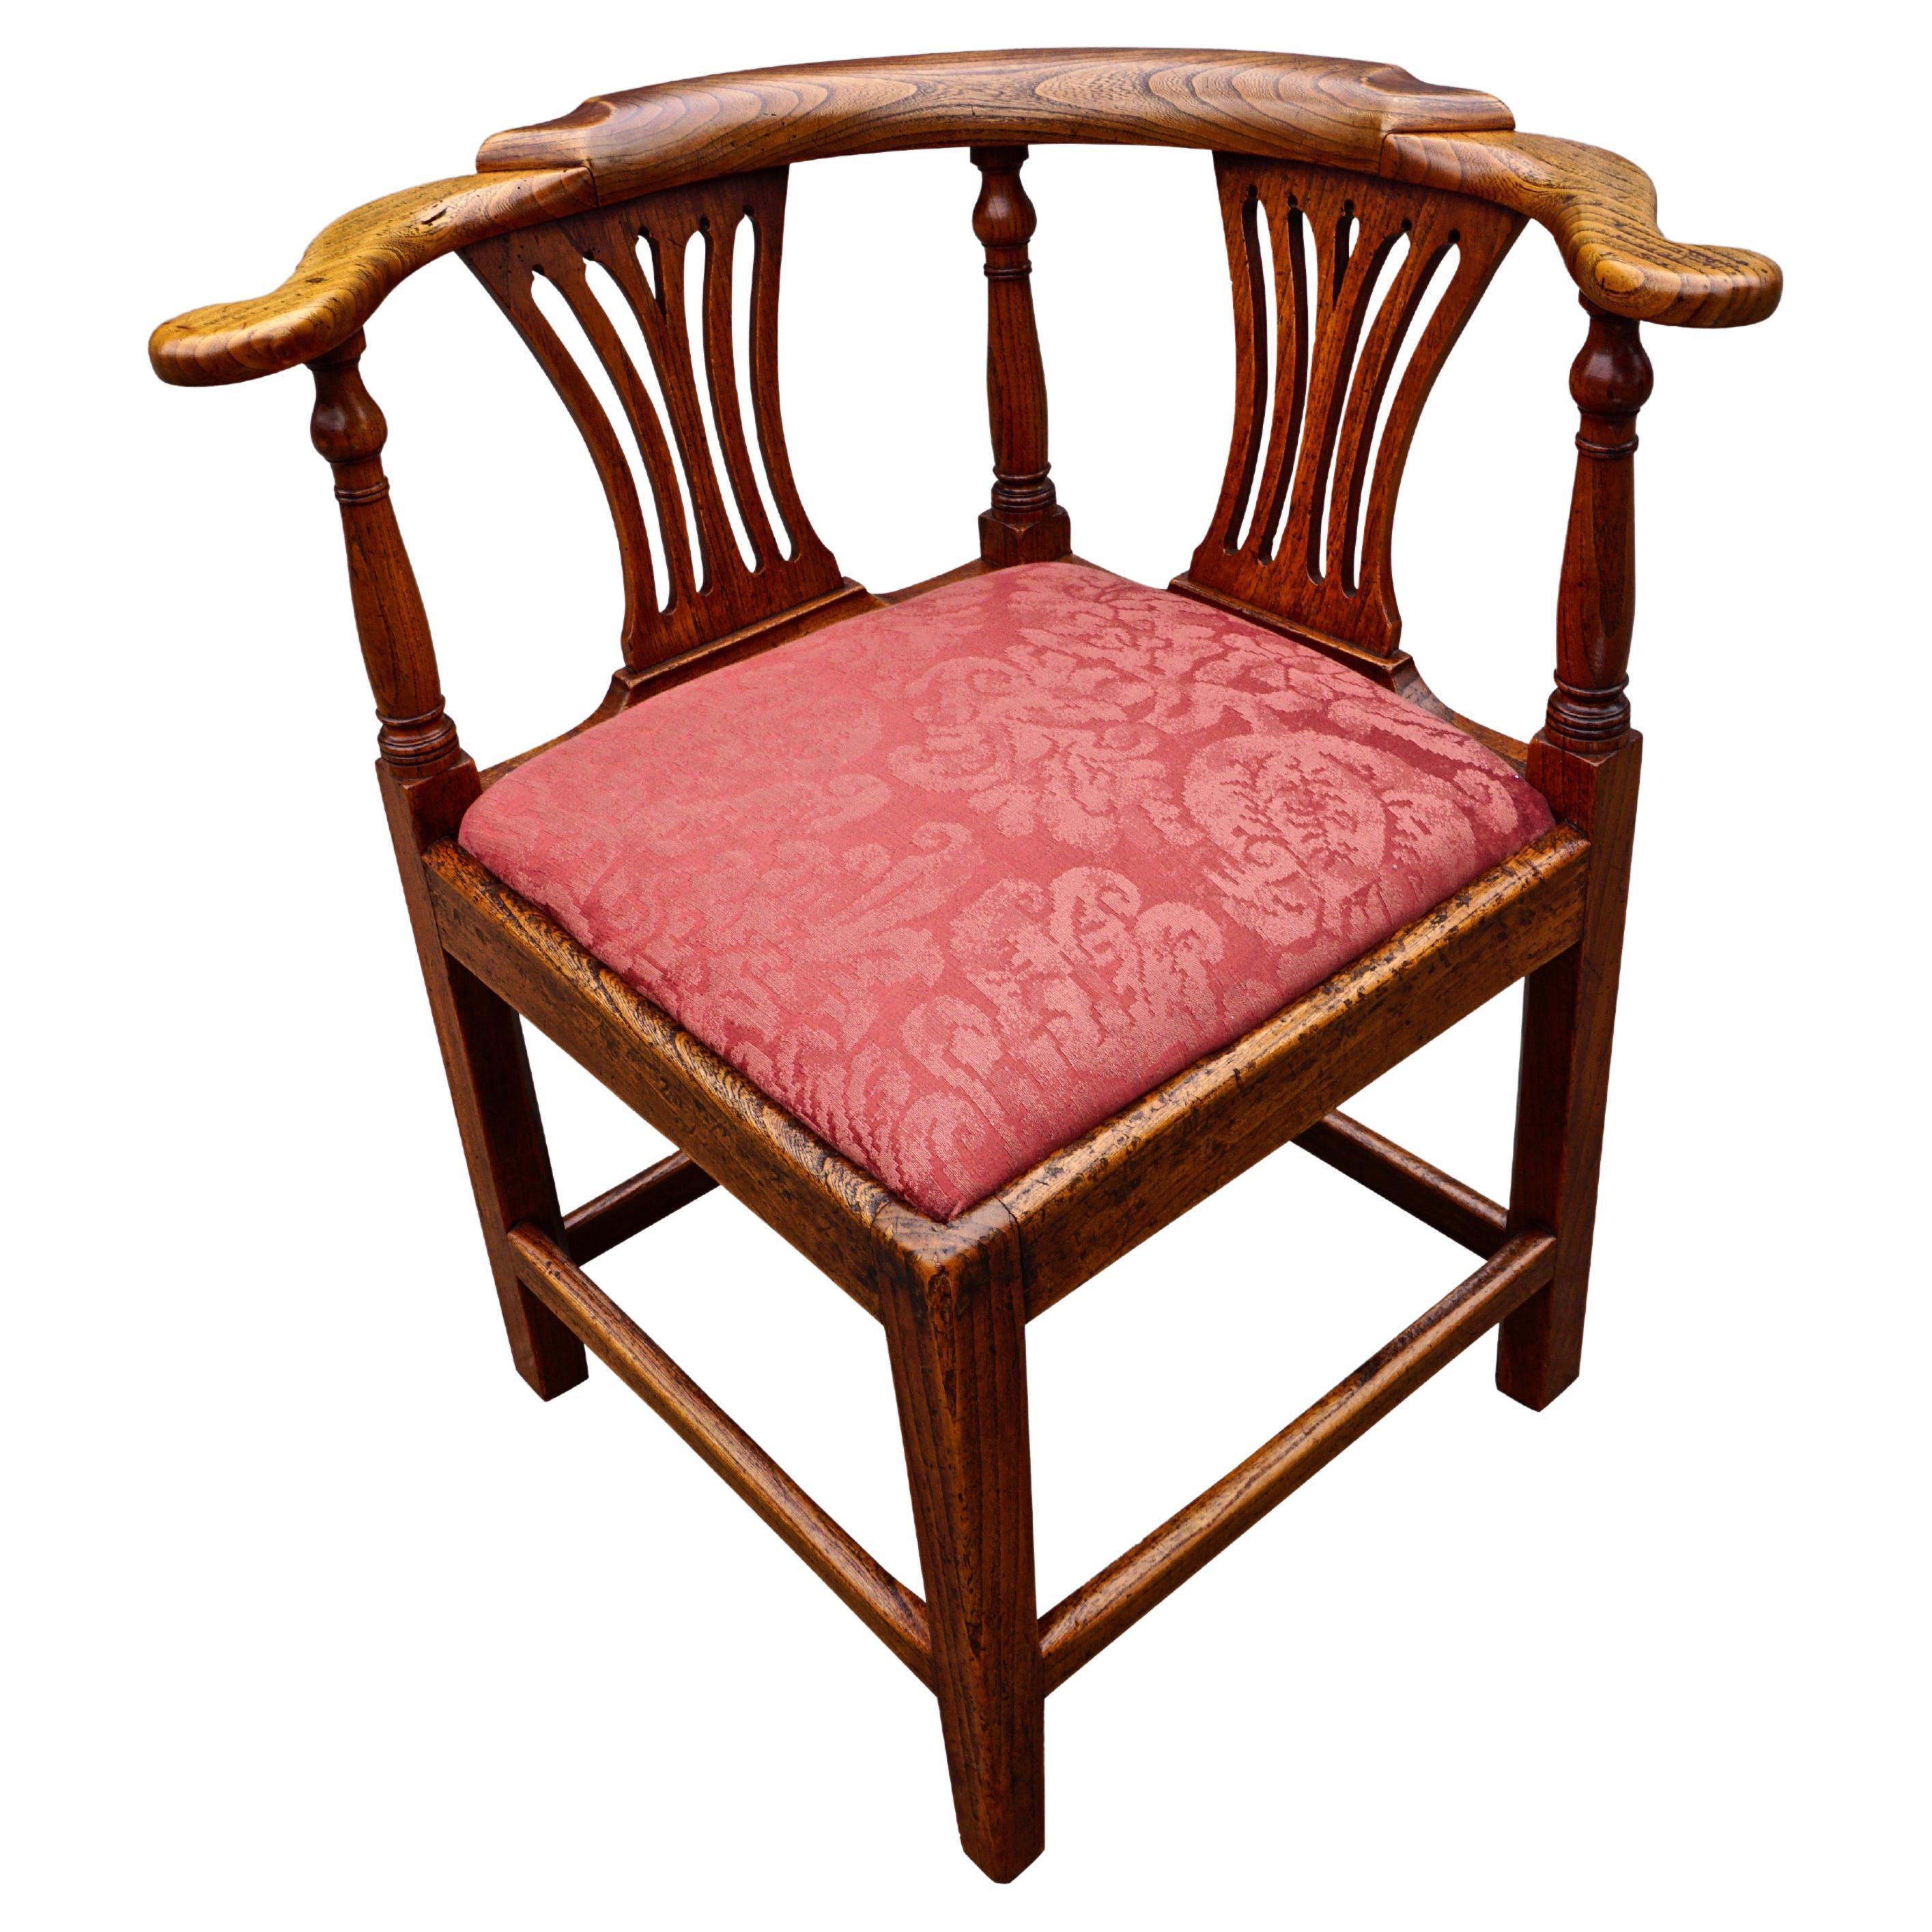 English Oak George III Period Corner Chair with Damask Upholstered Seat